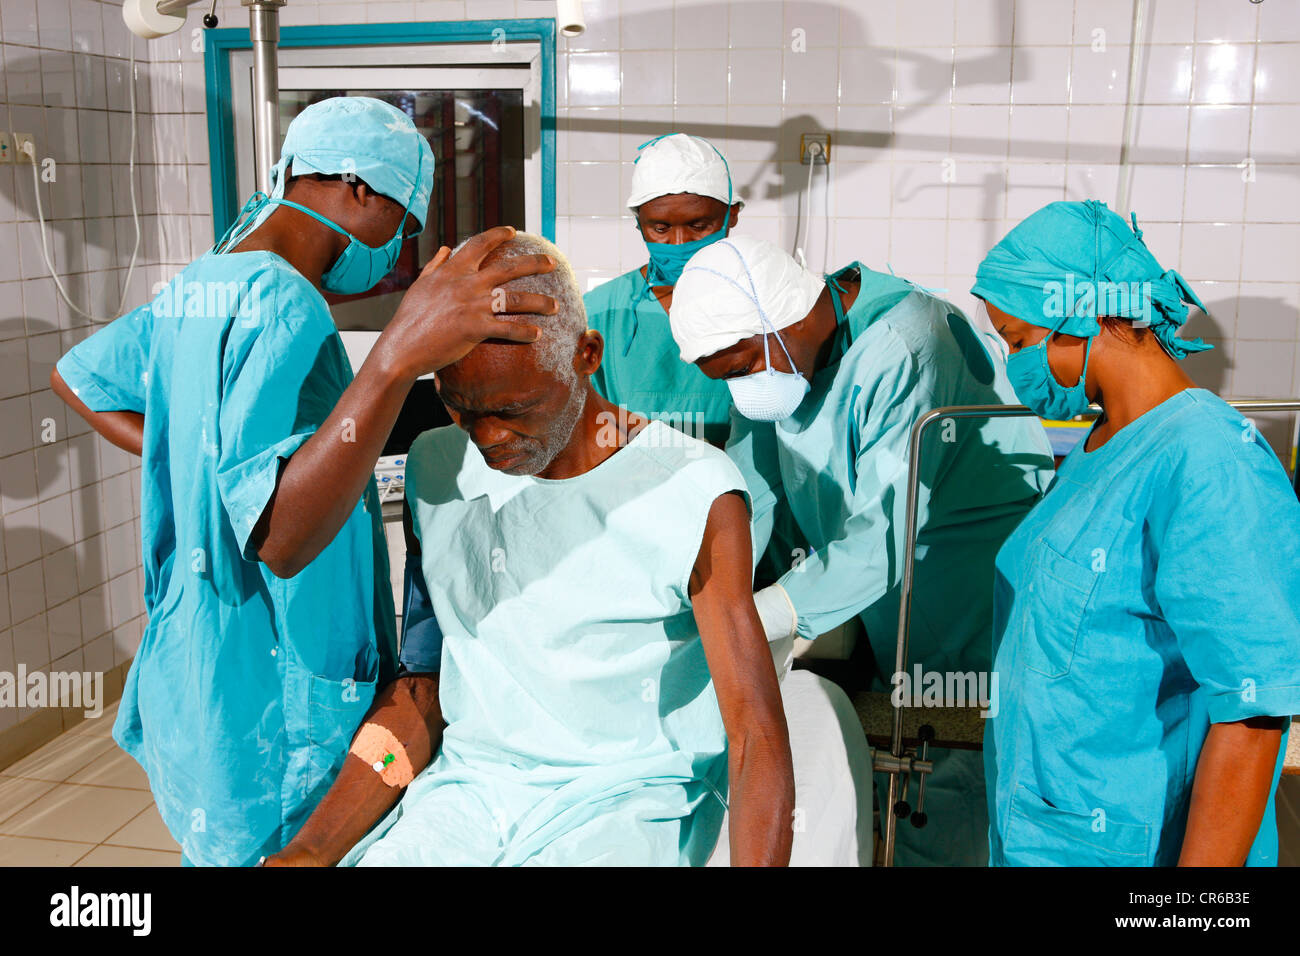 Man being prepared for surgery, hospital, Manyemen, Cameroon, Africa Stock Photo